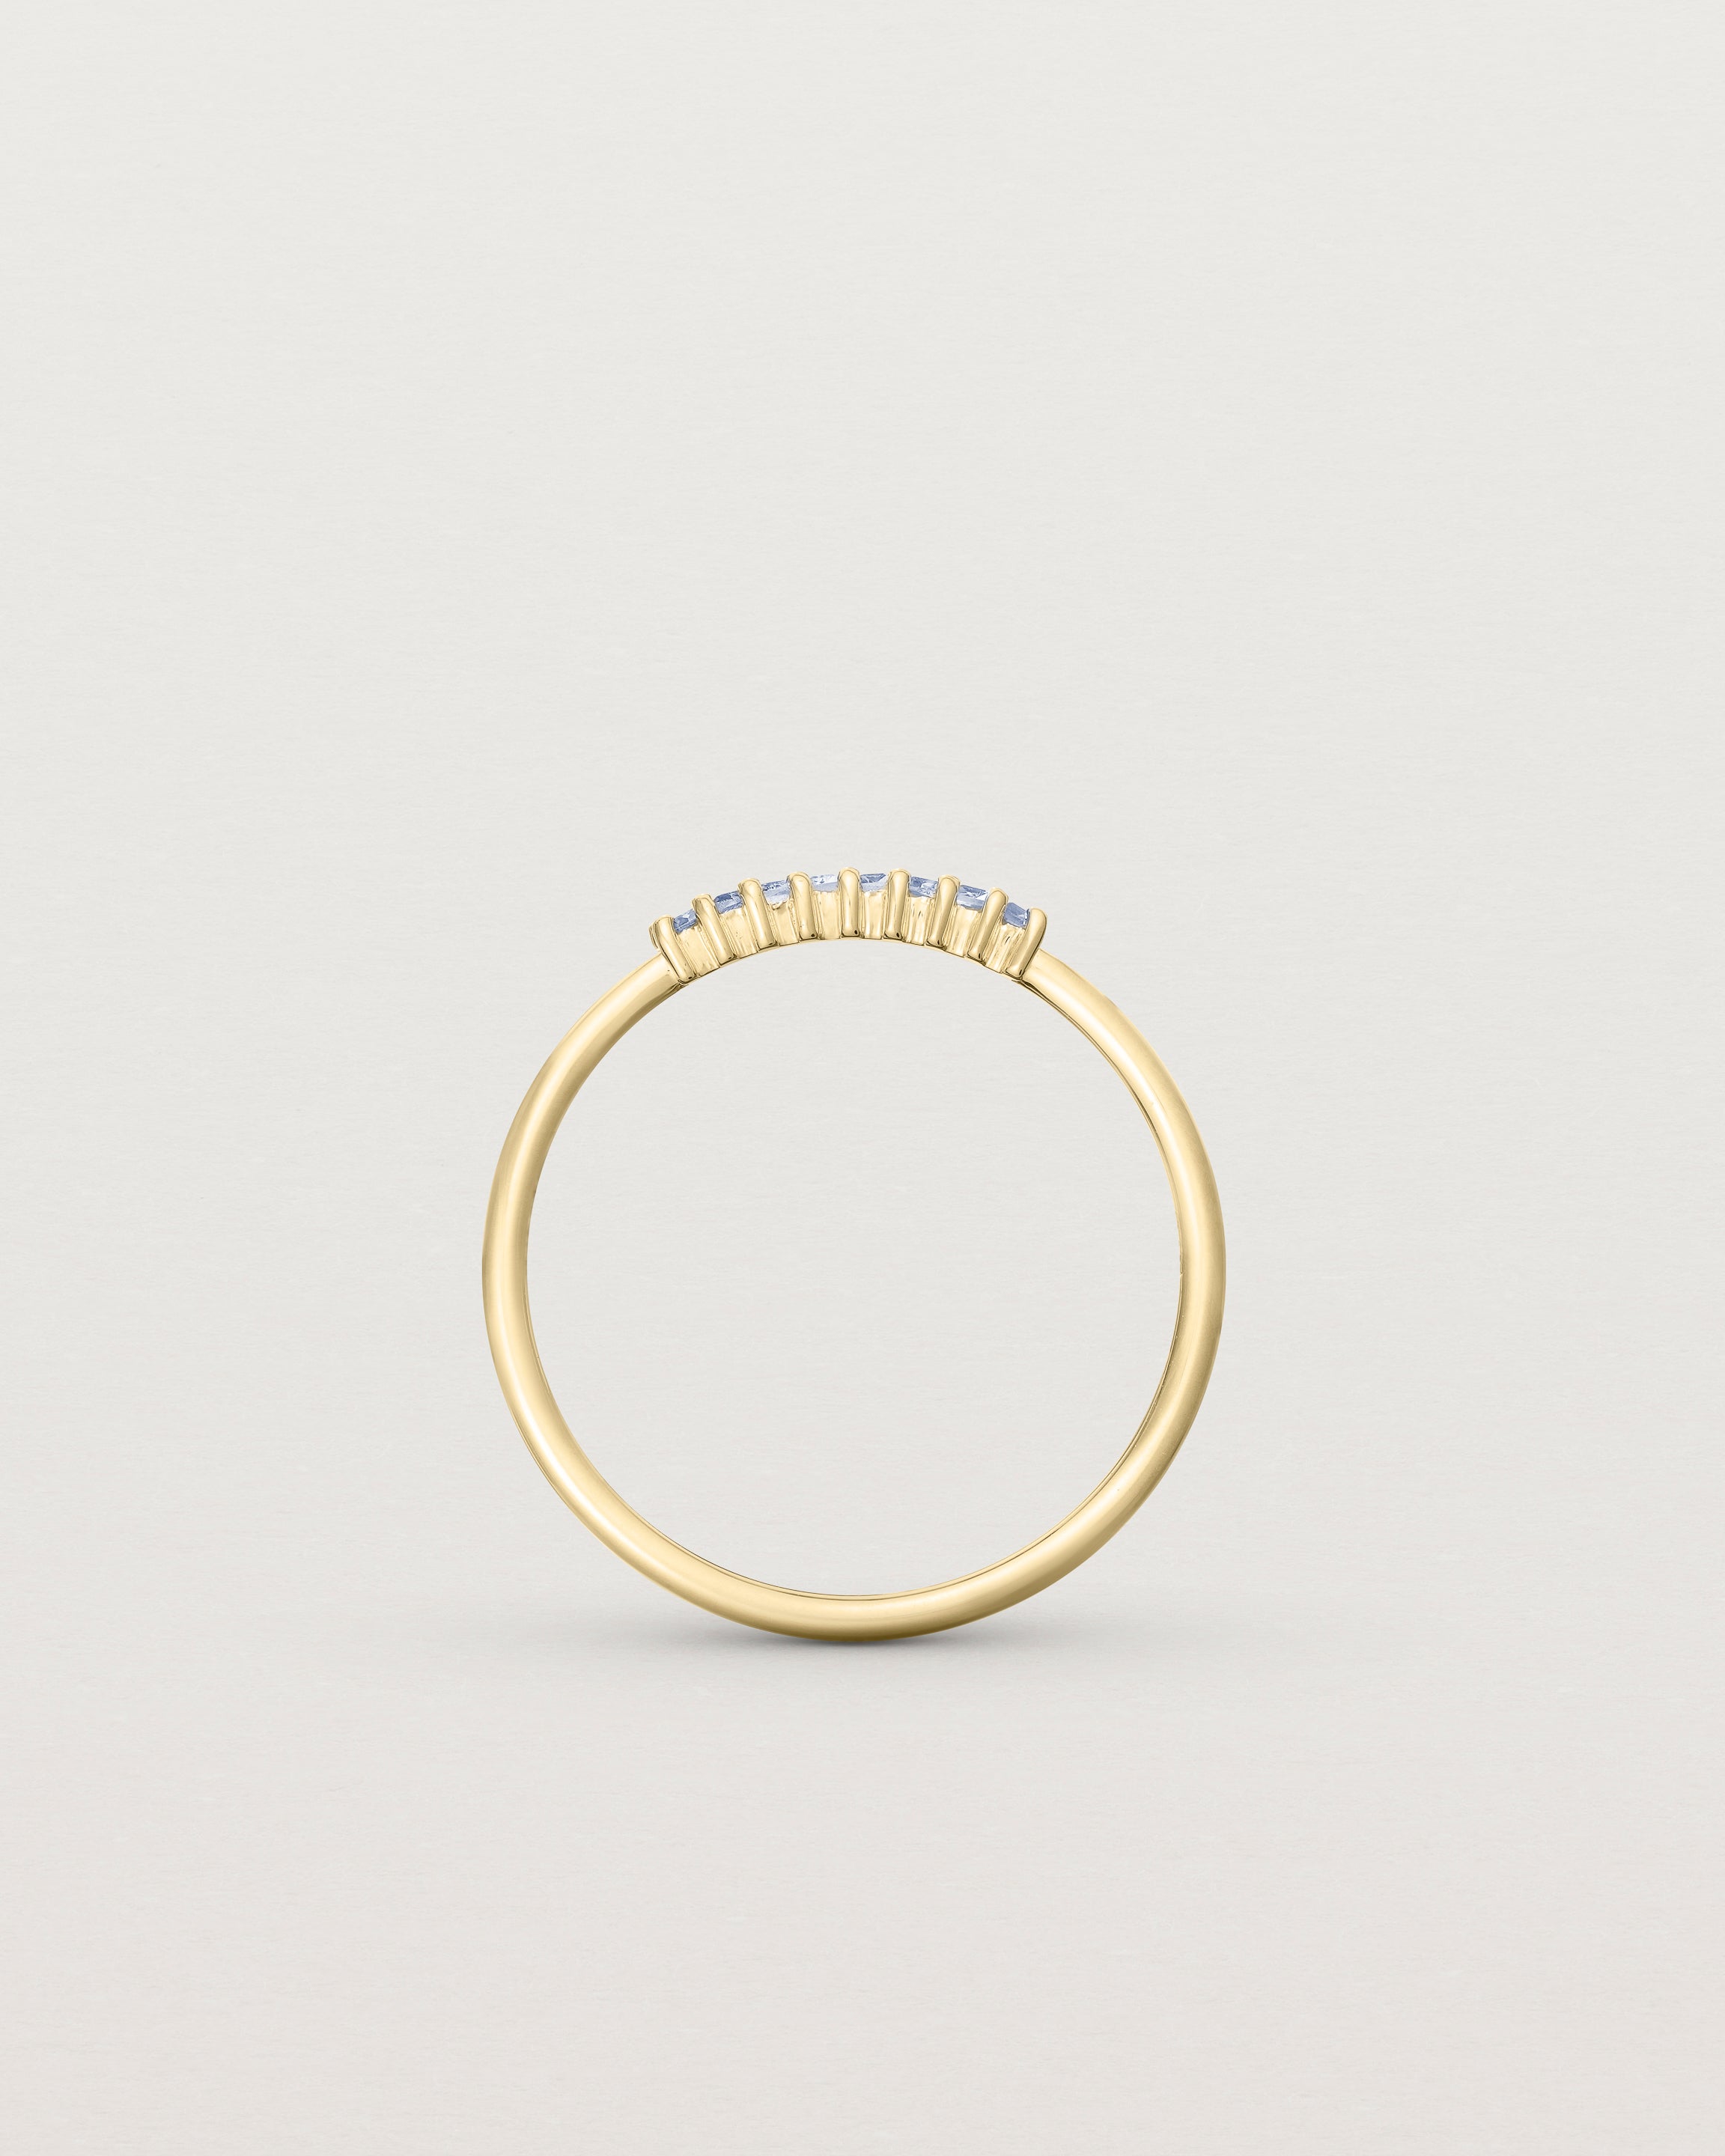 Standing view of the Sena Wrap Ring | Sapphire in yellow gold.